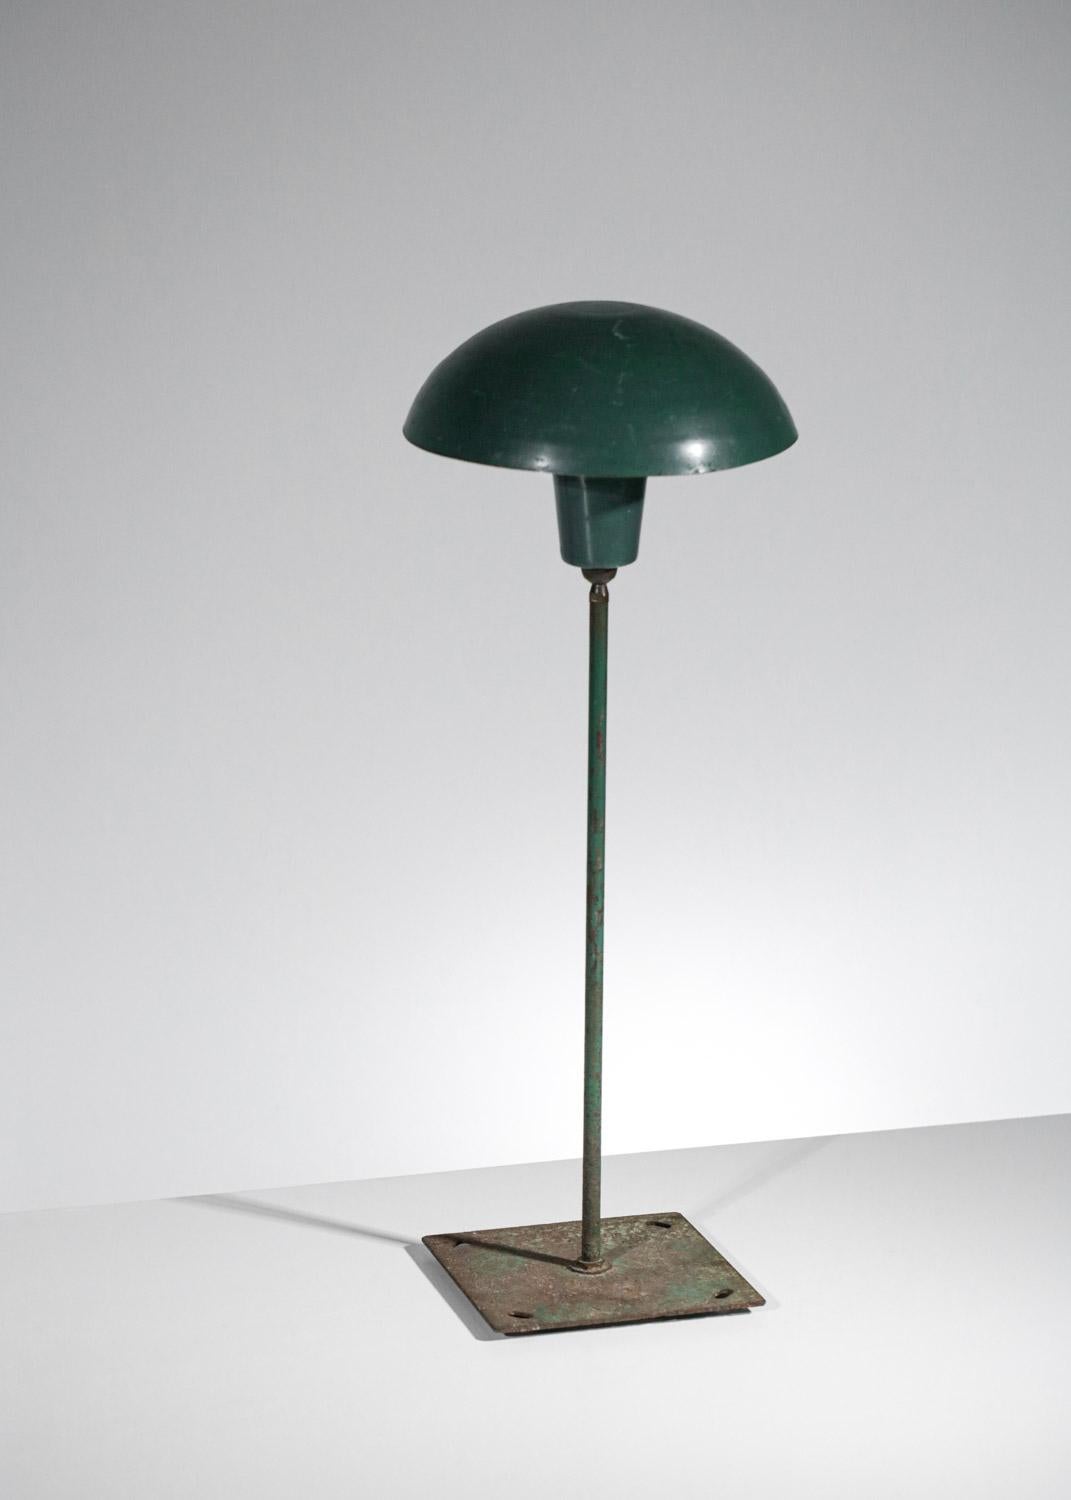 Industrial Danish Outdoor Table Lamp in Lacquered Metal 50s Style Poul Hennigsen For Sale